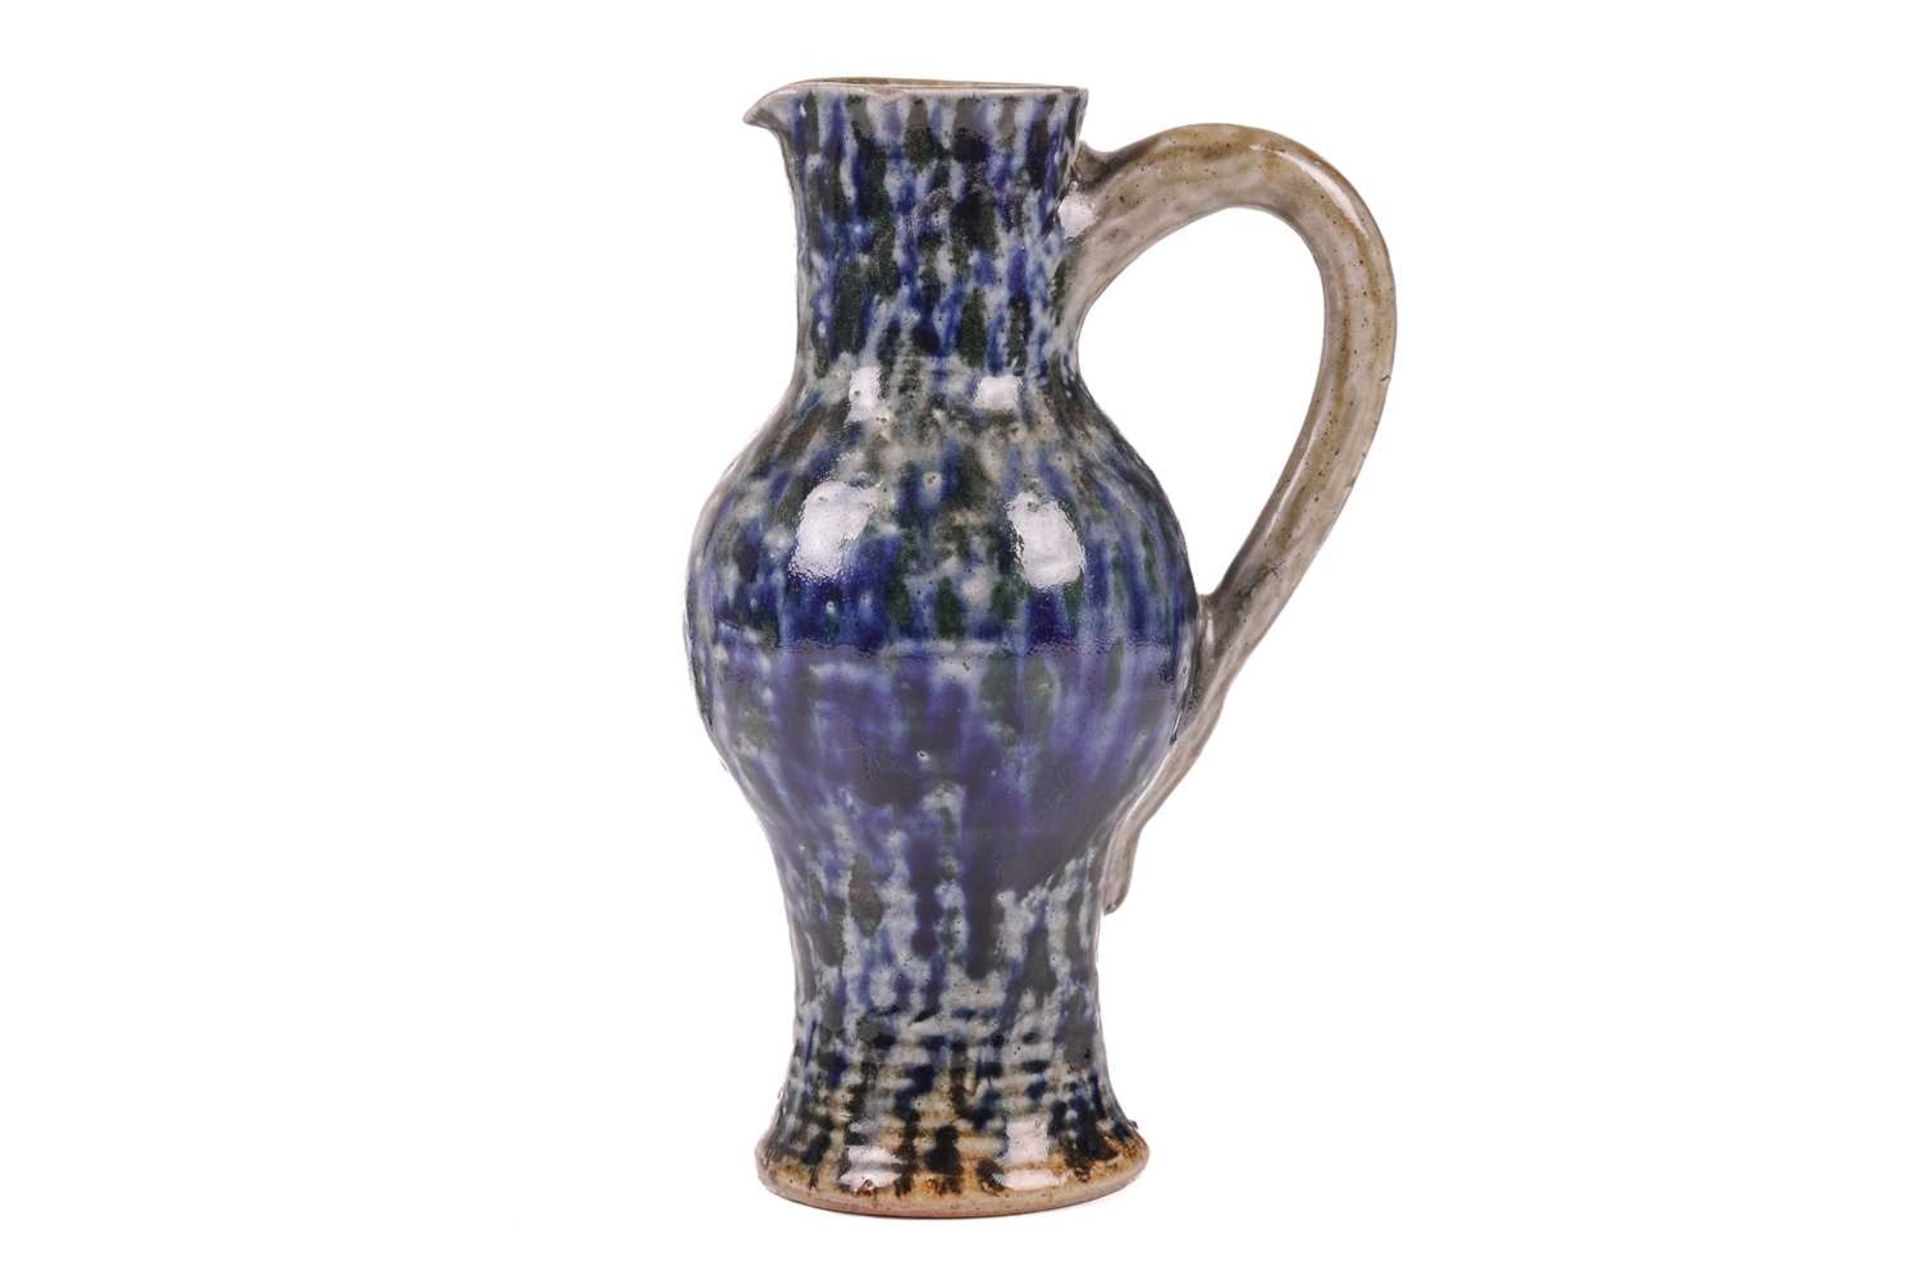 A late 19th century Martin Brothers stoneware jug, of bellied form with mottled blue glaze on a